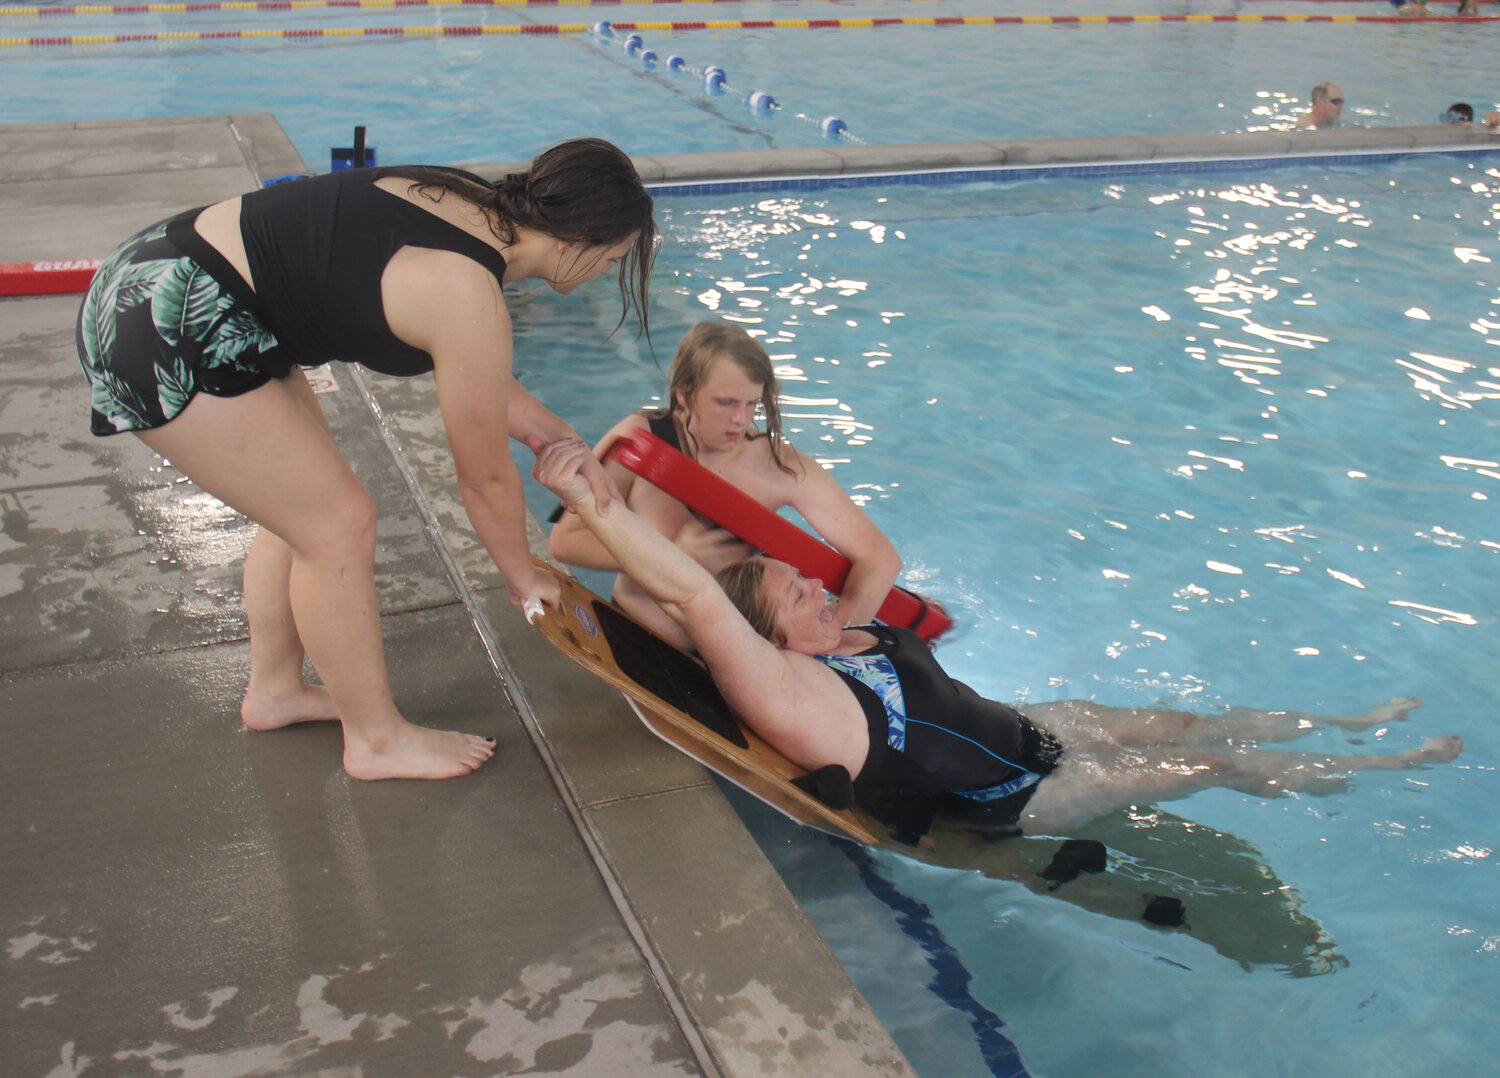 Miakoda Rose and Hunter Grube work together to "rescue" fellow lifeguard candidate Tamara Wurth from the water during training on May 19.